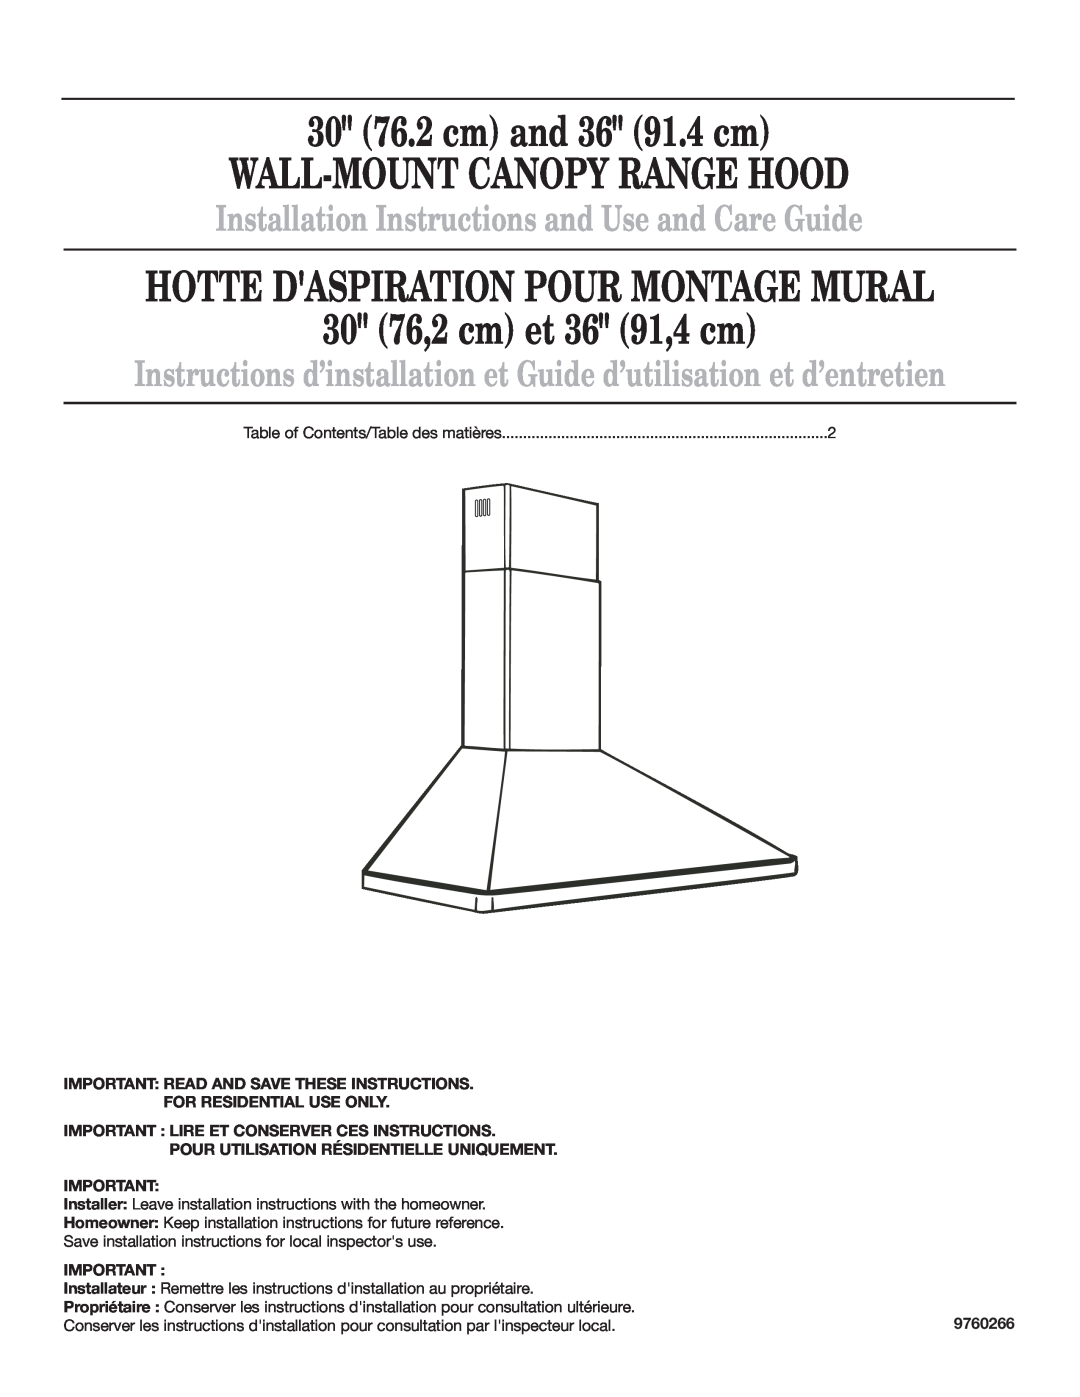 Whirlpool 9760266 installation instructions Important Read And Save These Instructions, For Residential Use Only 